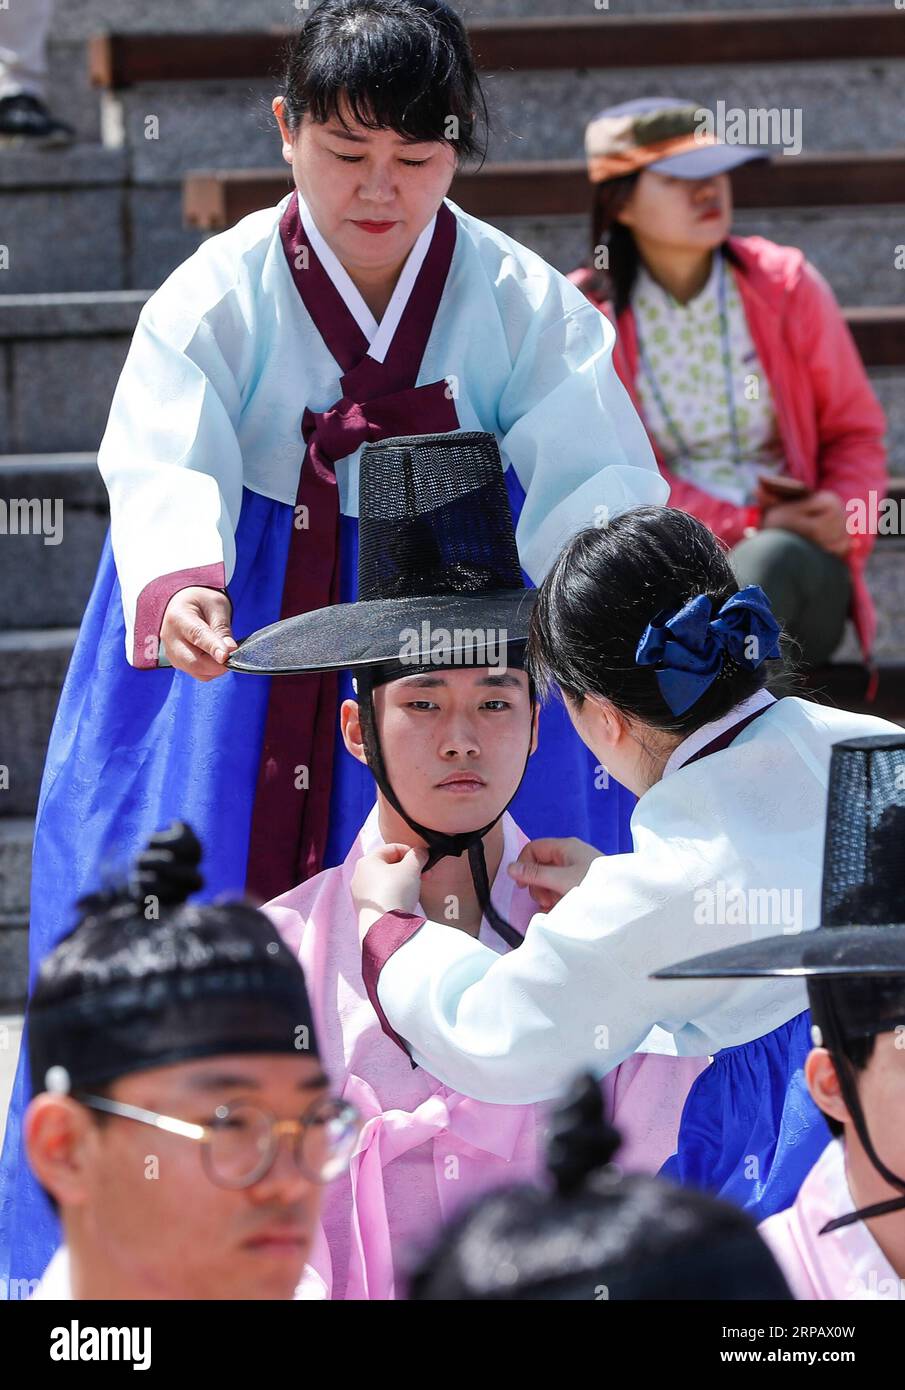 (190520) -- SEOUL, May 20, 2019 (Xinhua) -- A student wearing traditional Korean costume attends a coming-of-age ceremony in Seoul, capital of South Korea, May 20, 2019. (Xinhua/Wang Jingqiang) SOUTH KOREA-SEOUL-COMING-OF-AGE CEREMONY PUBLICATIONxNOTxINxCHN Stock Photo